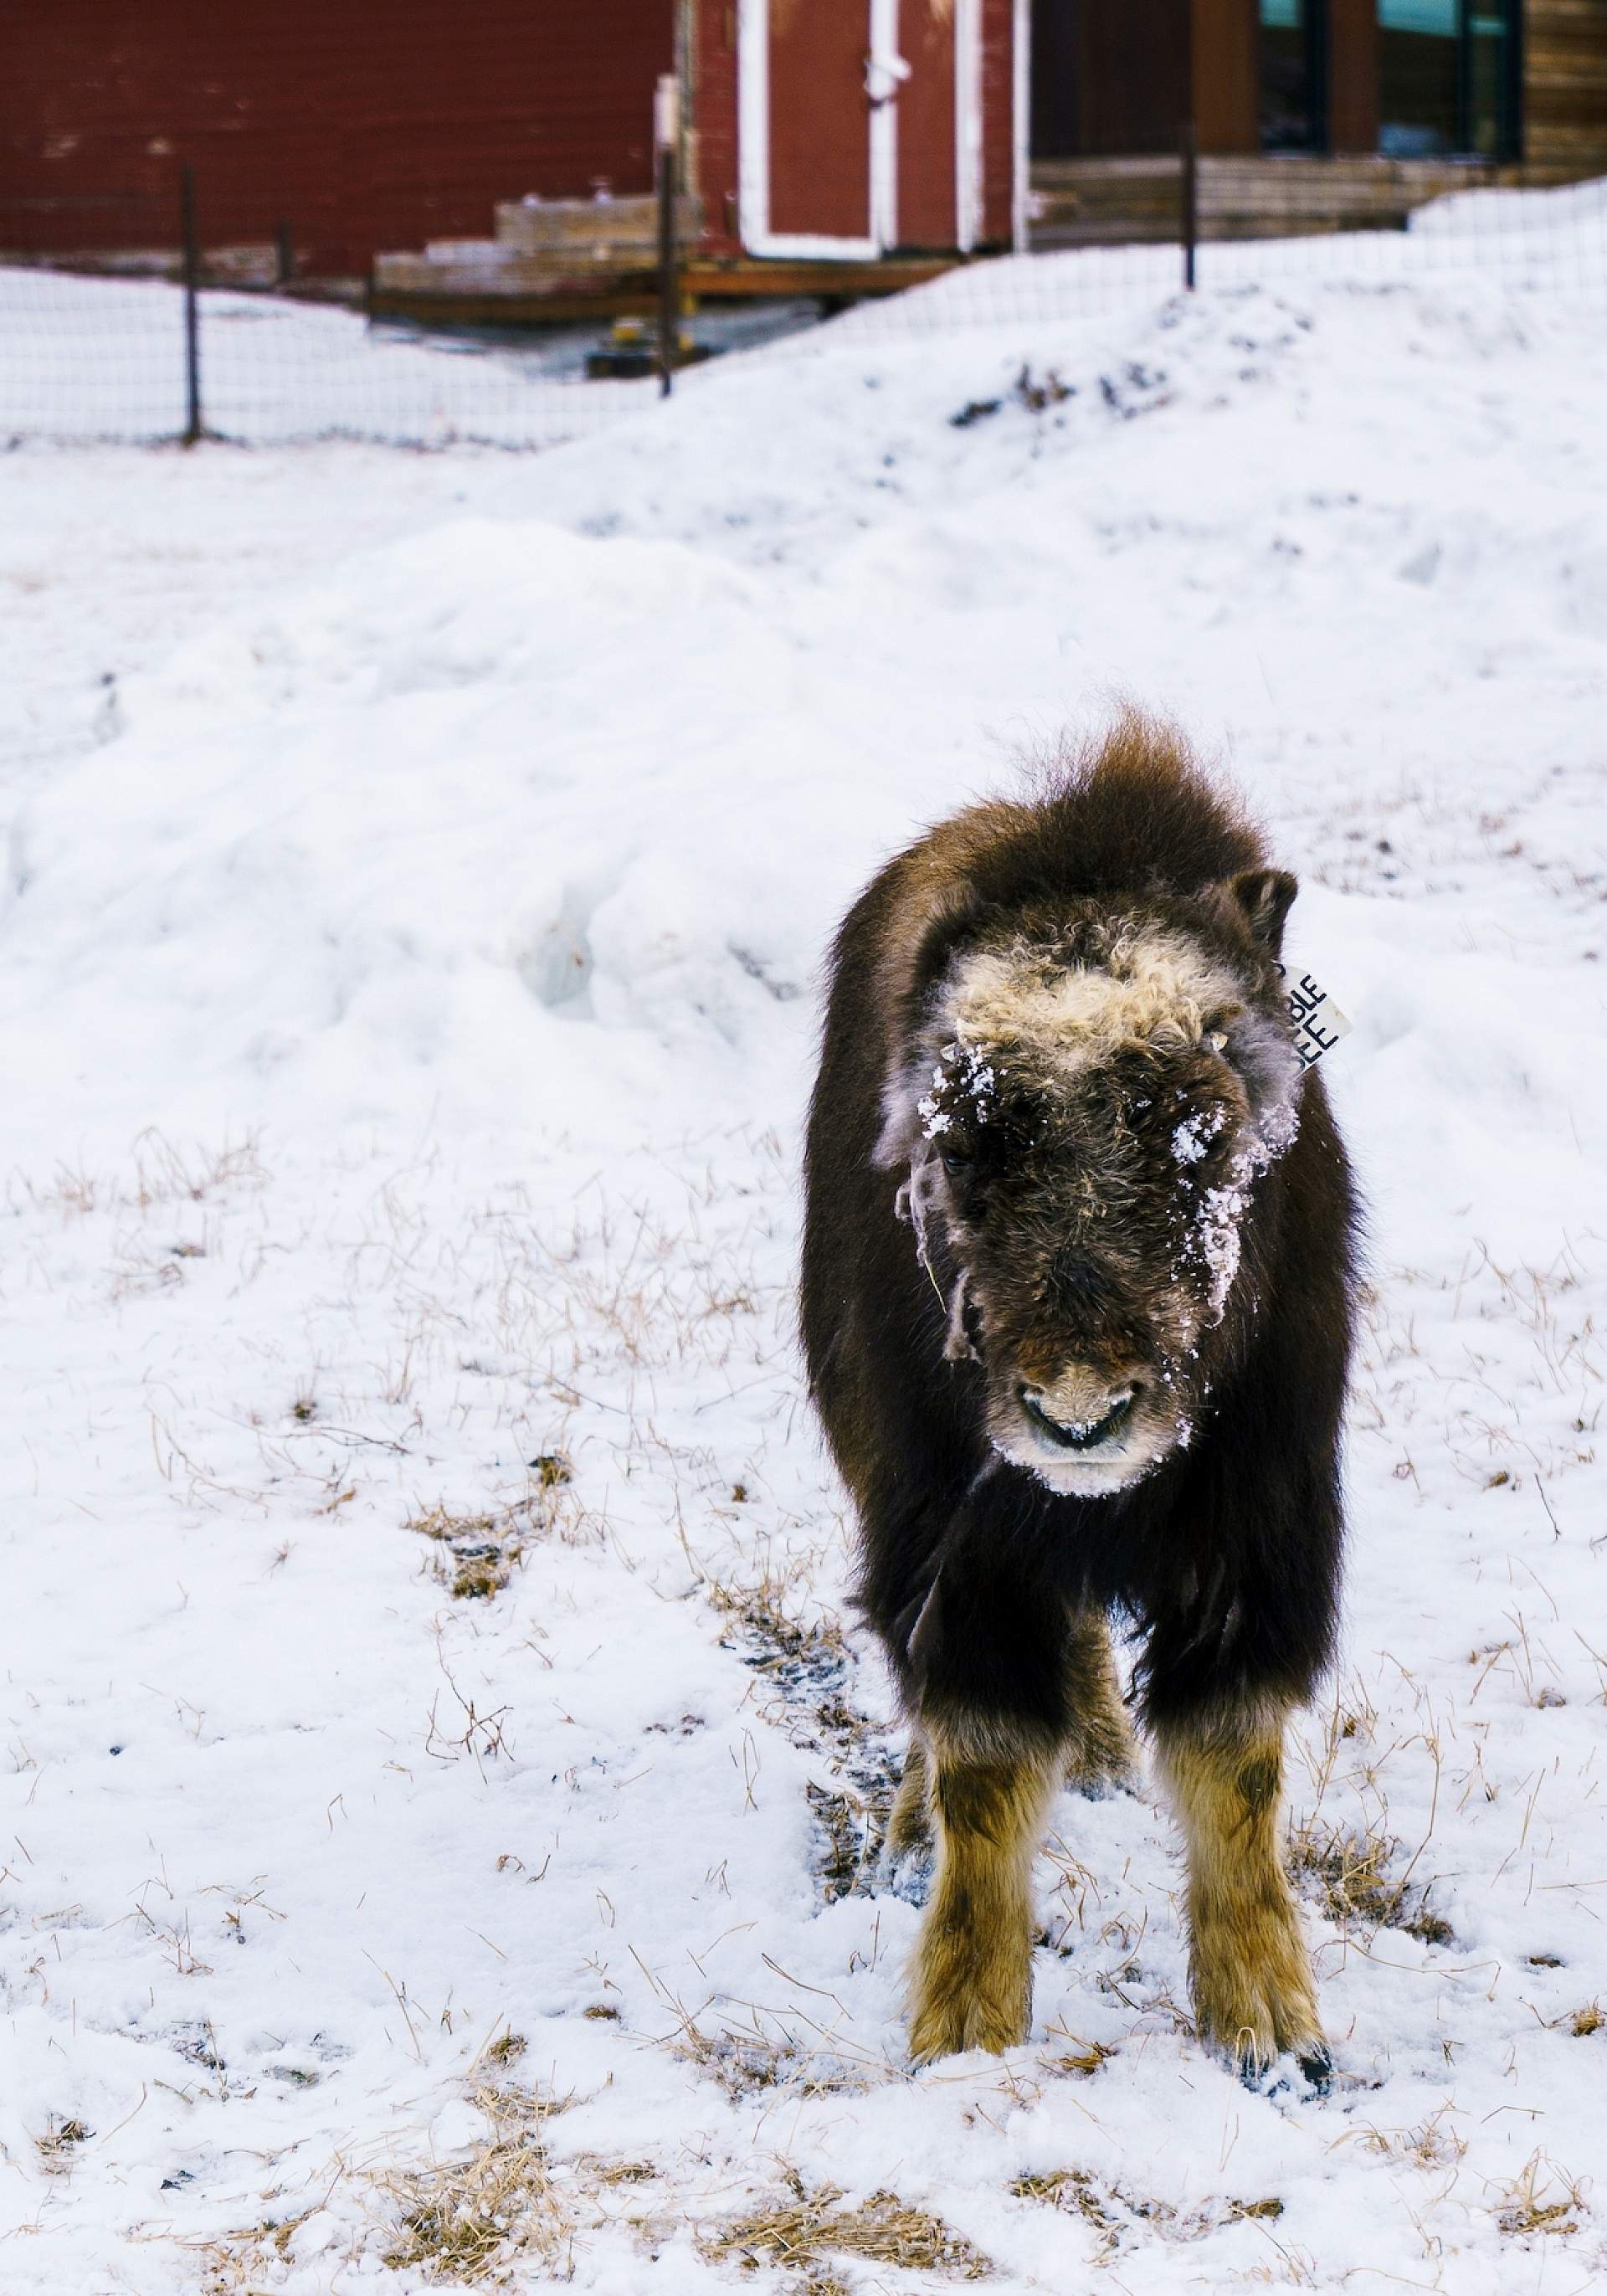 A musk ox calf stands in the snow at the Musk Ox Farm in Palmer, Alaska